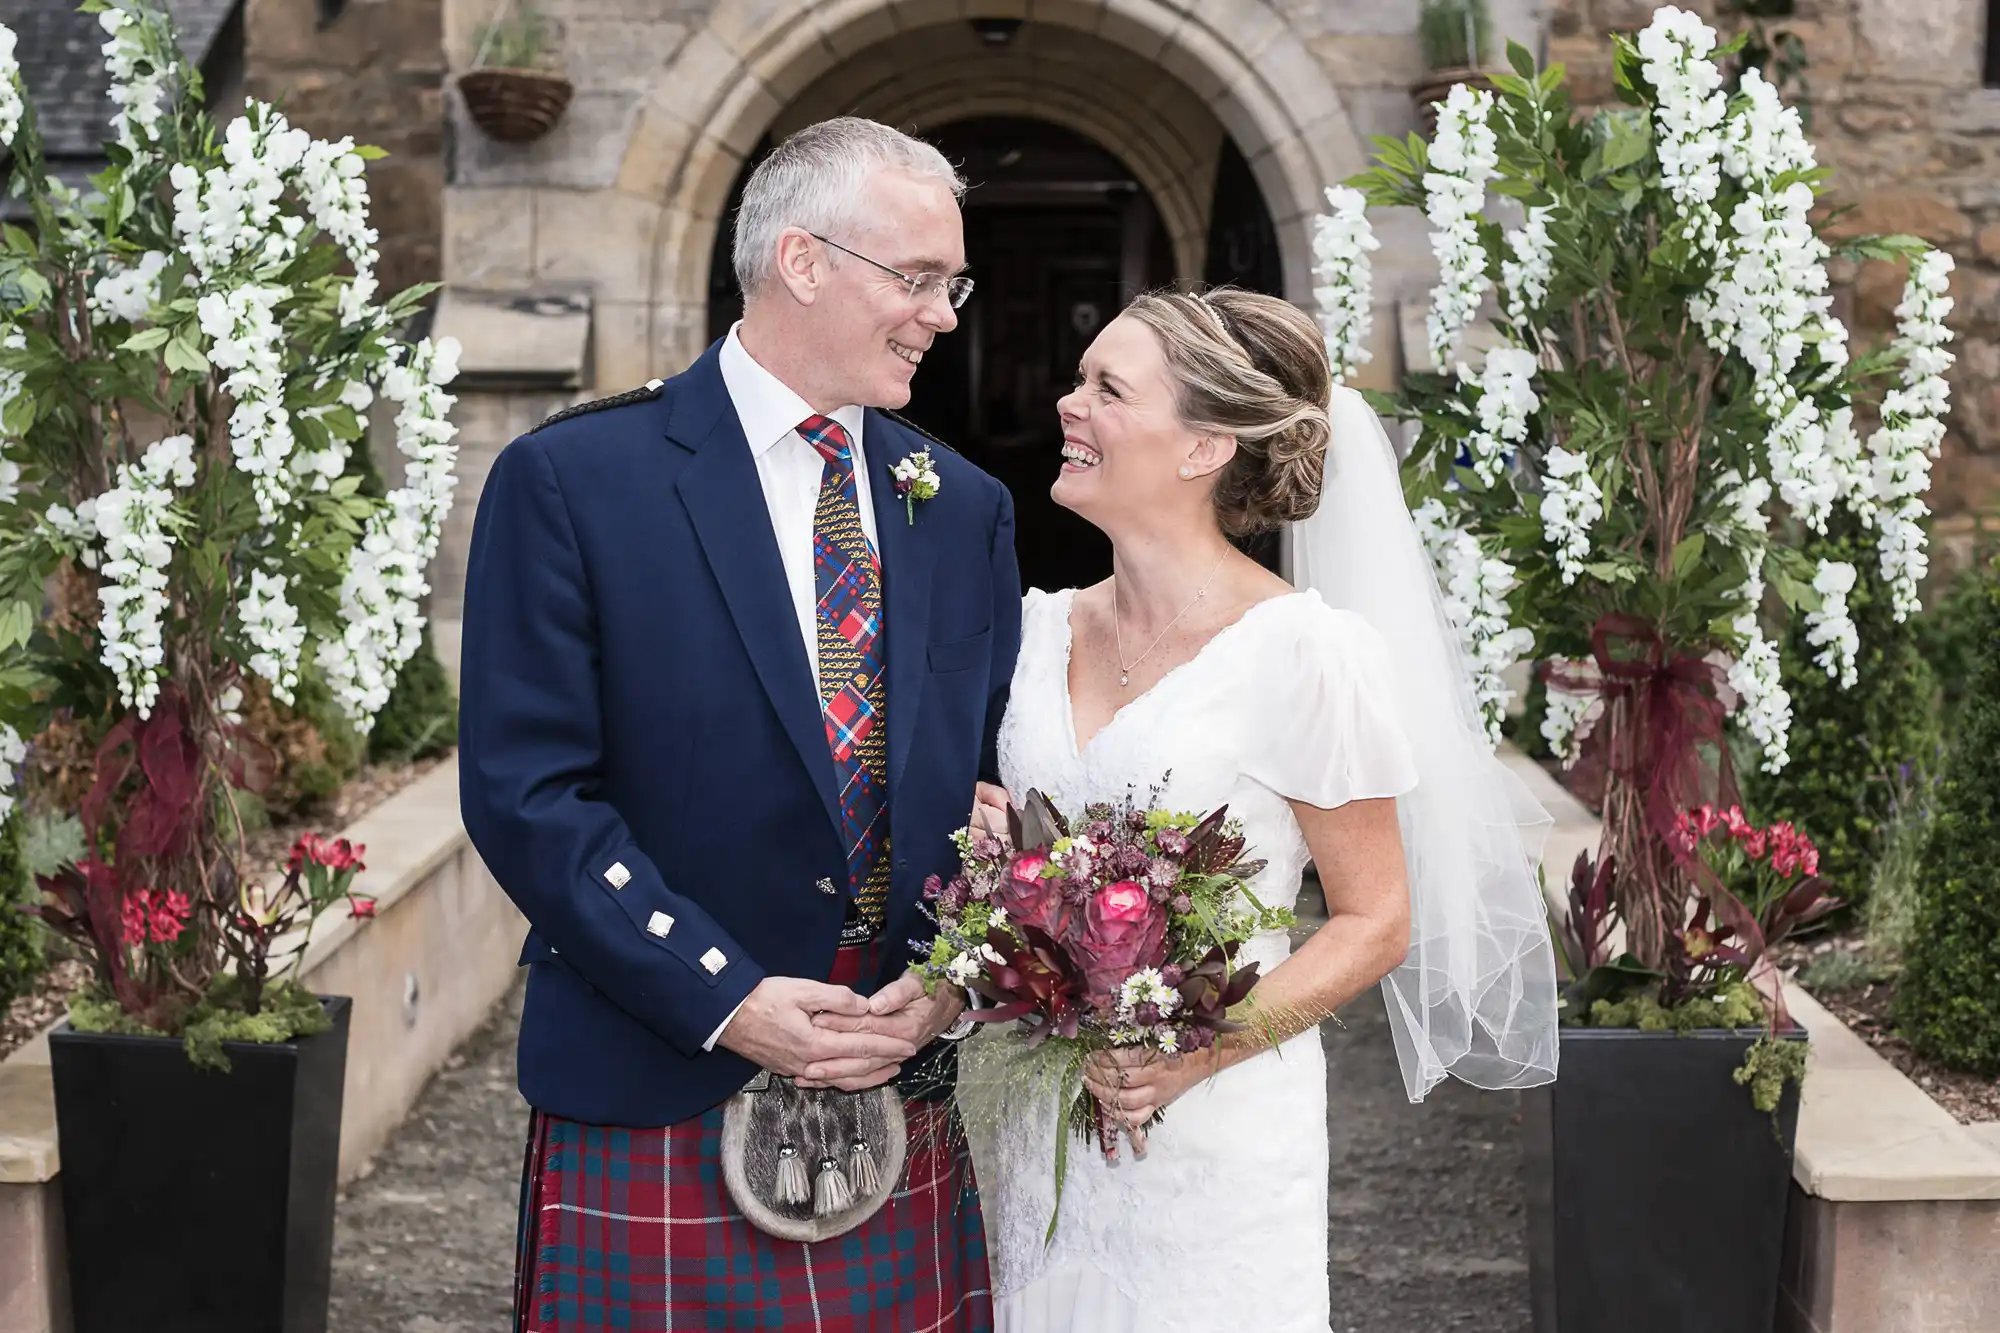 A bride and groom smiling at each other, the groom in a kilt and the bride in a white dress, standing at a church entrance decorated with white flowers.